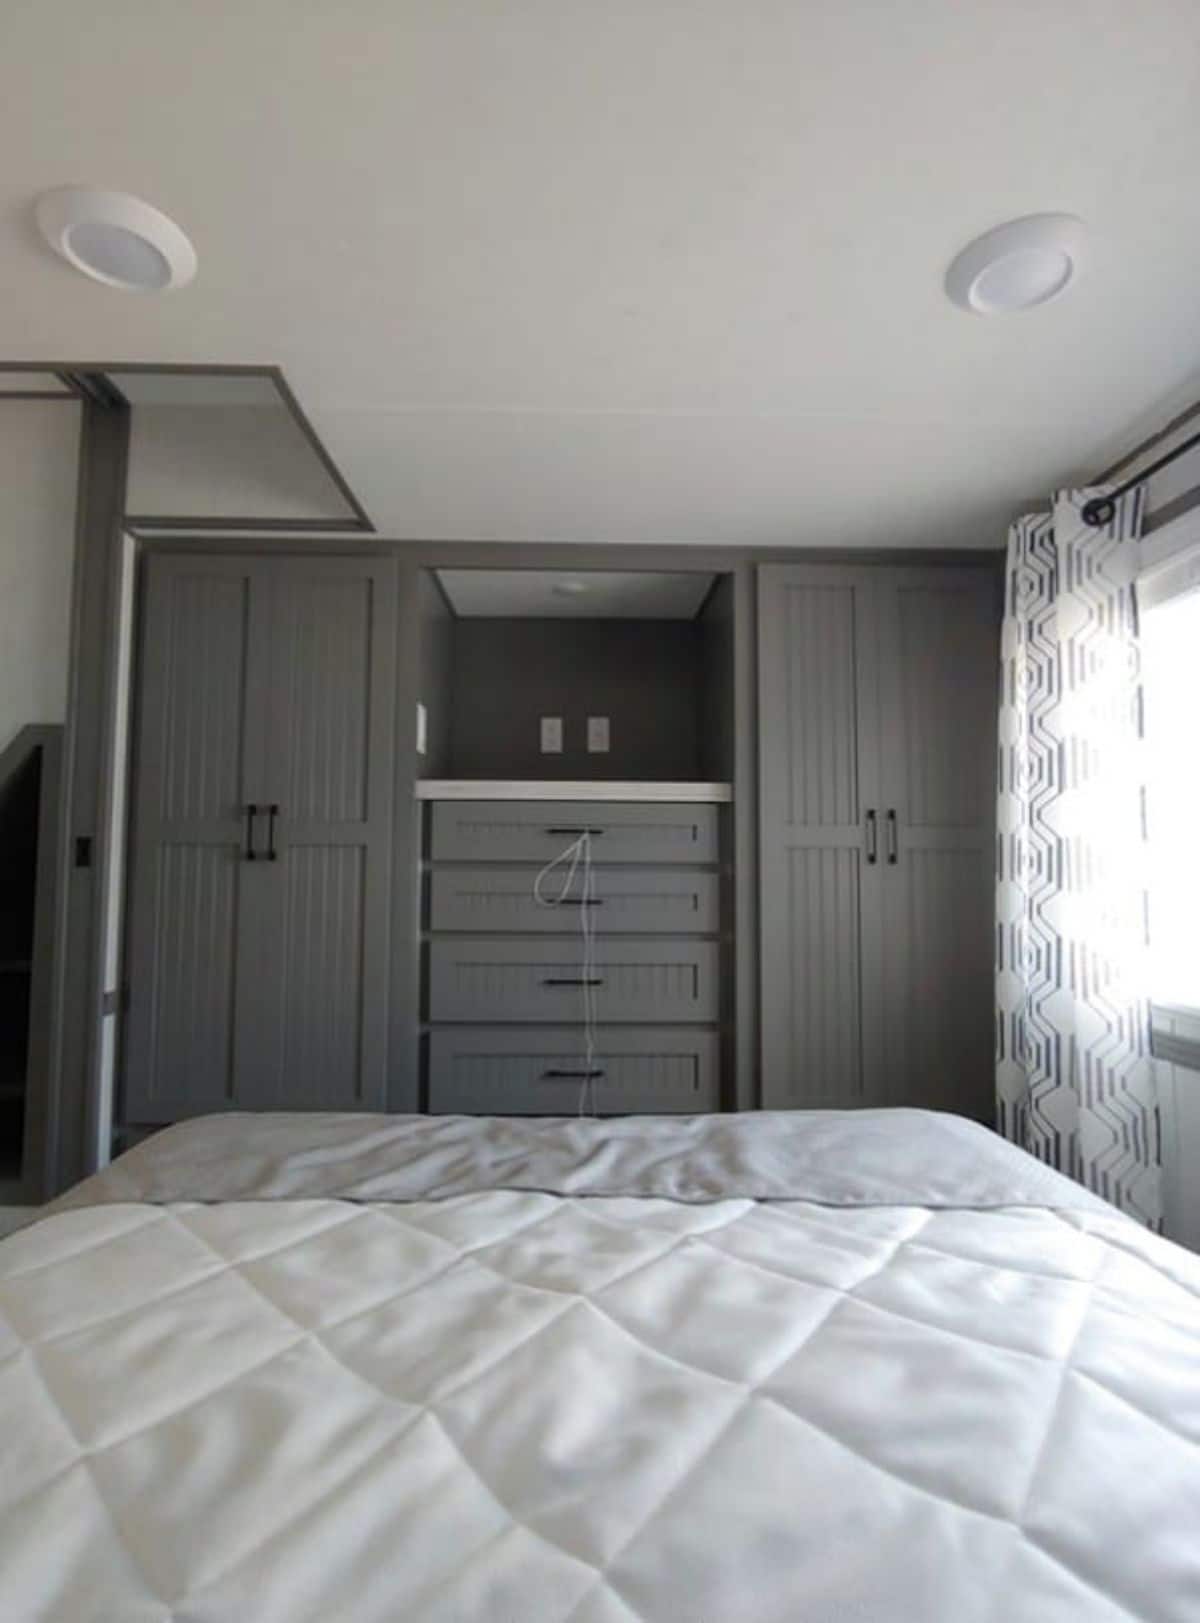 Park Model Homes Tiny House With Ample Storage in the Downstairs Bedroom